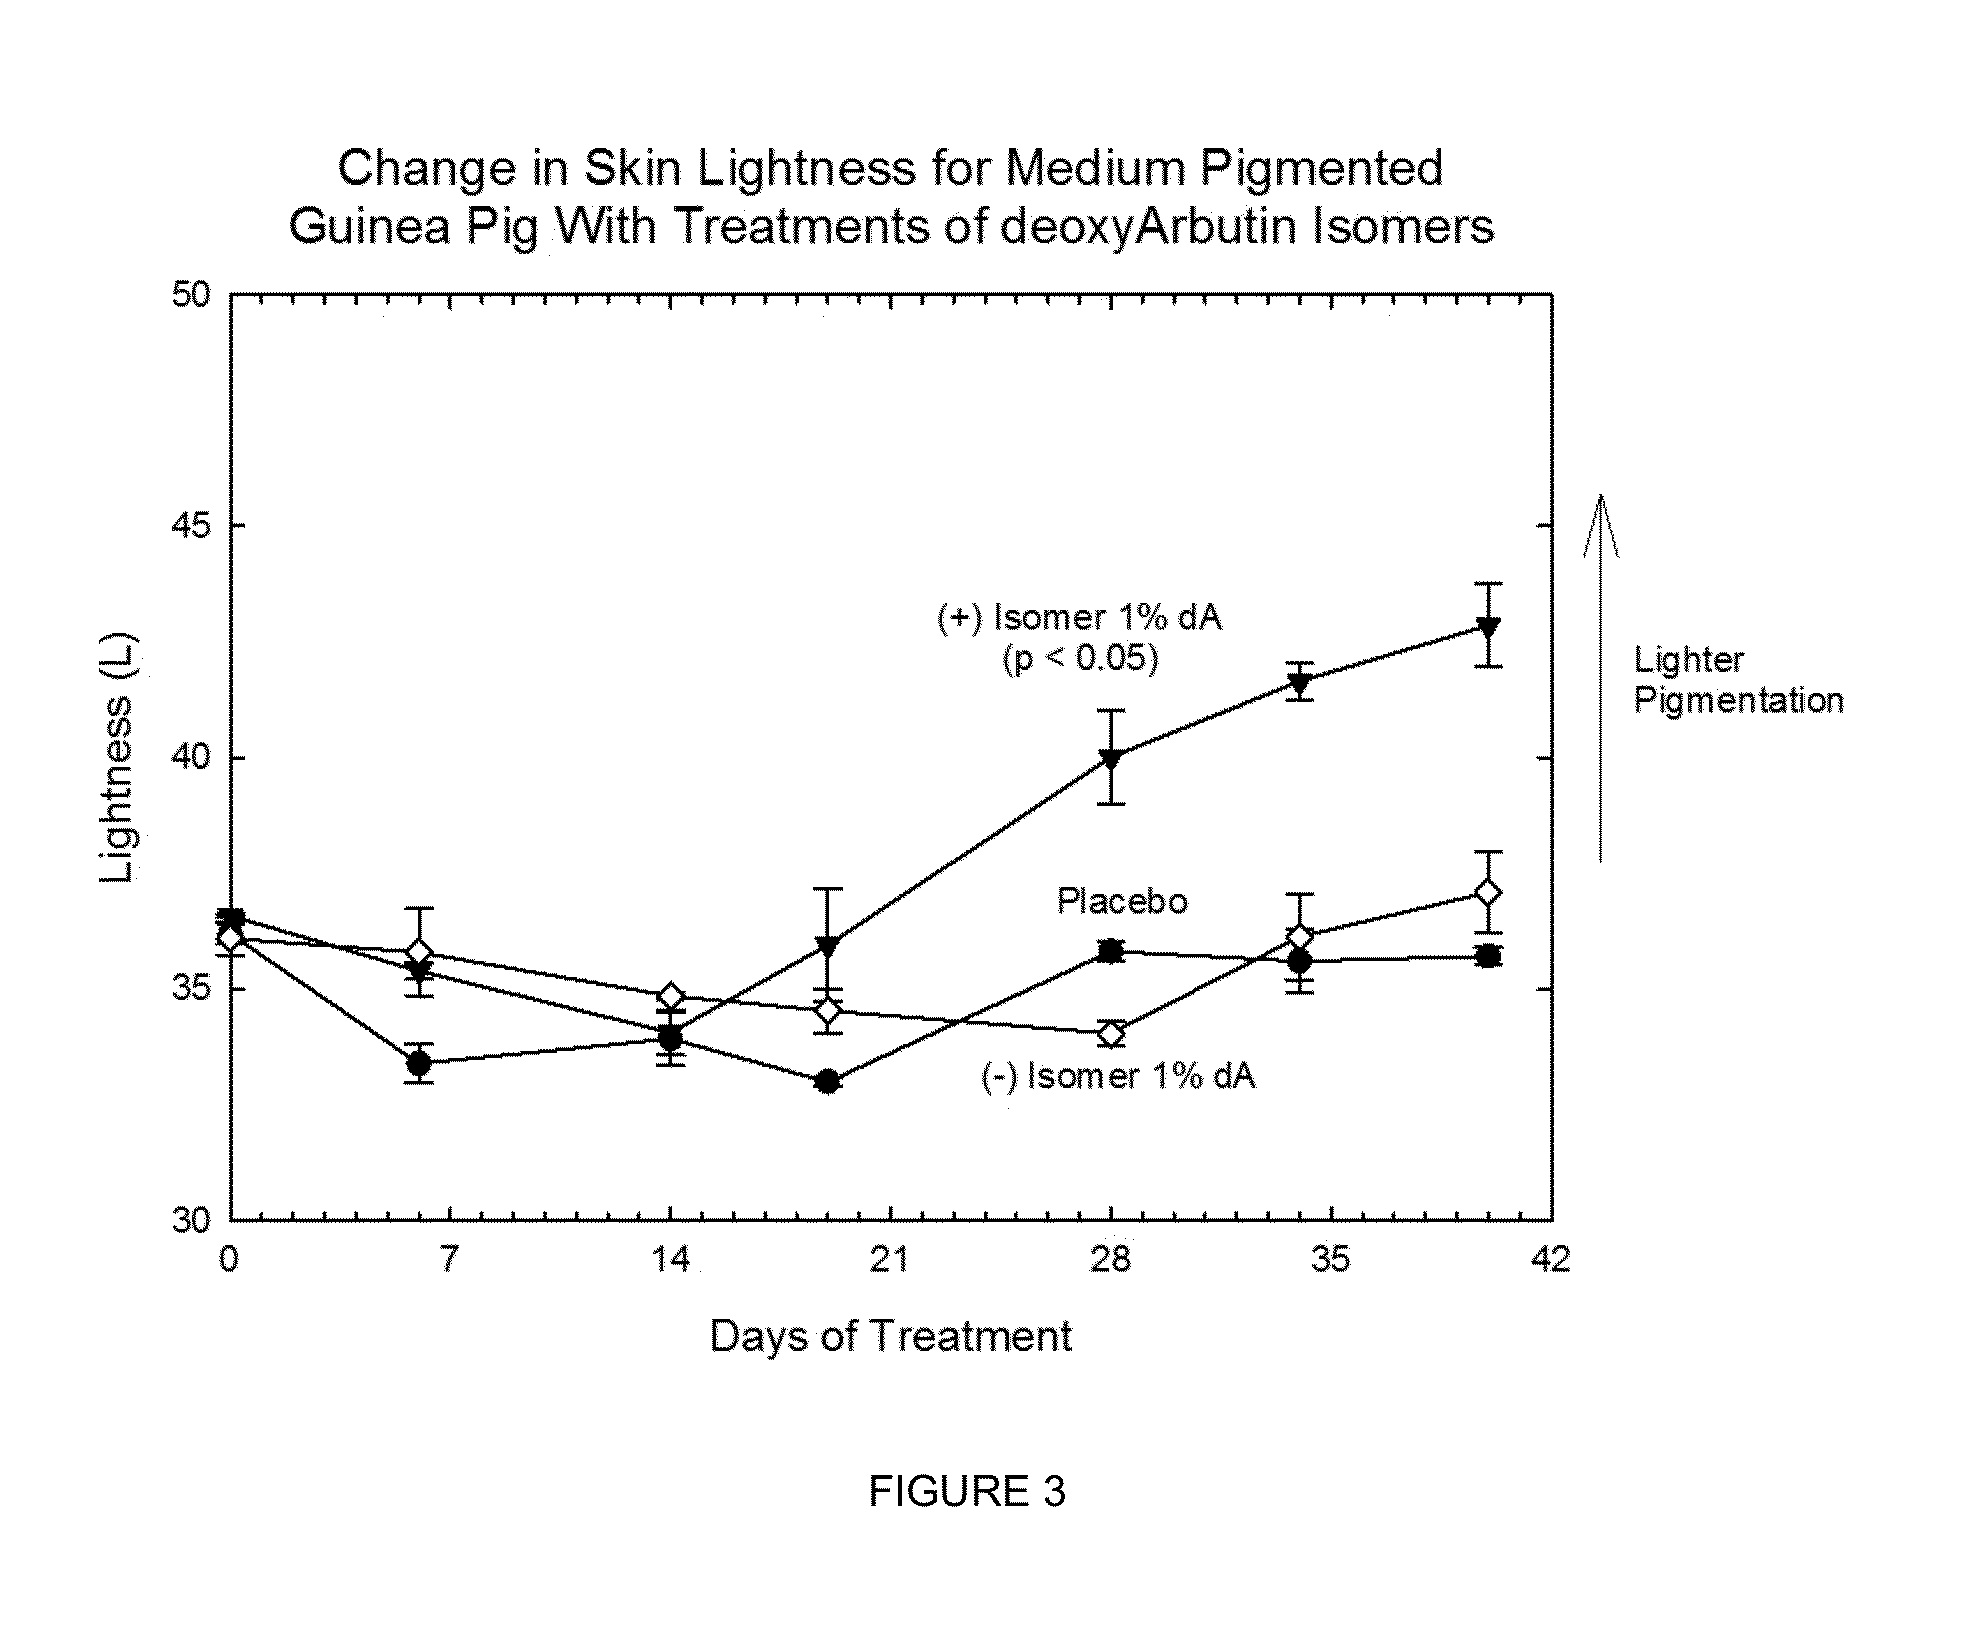 Chiral compounds, compositions, products and methods employing same